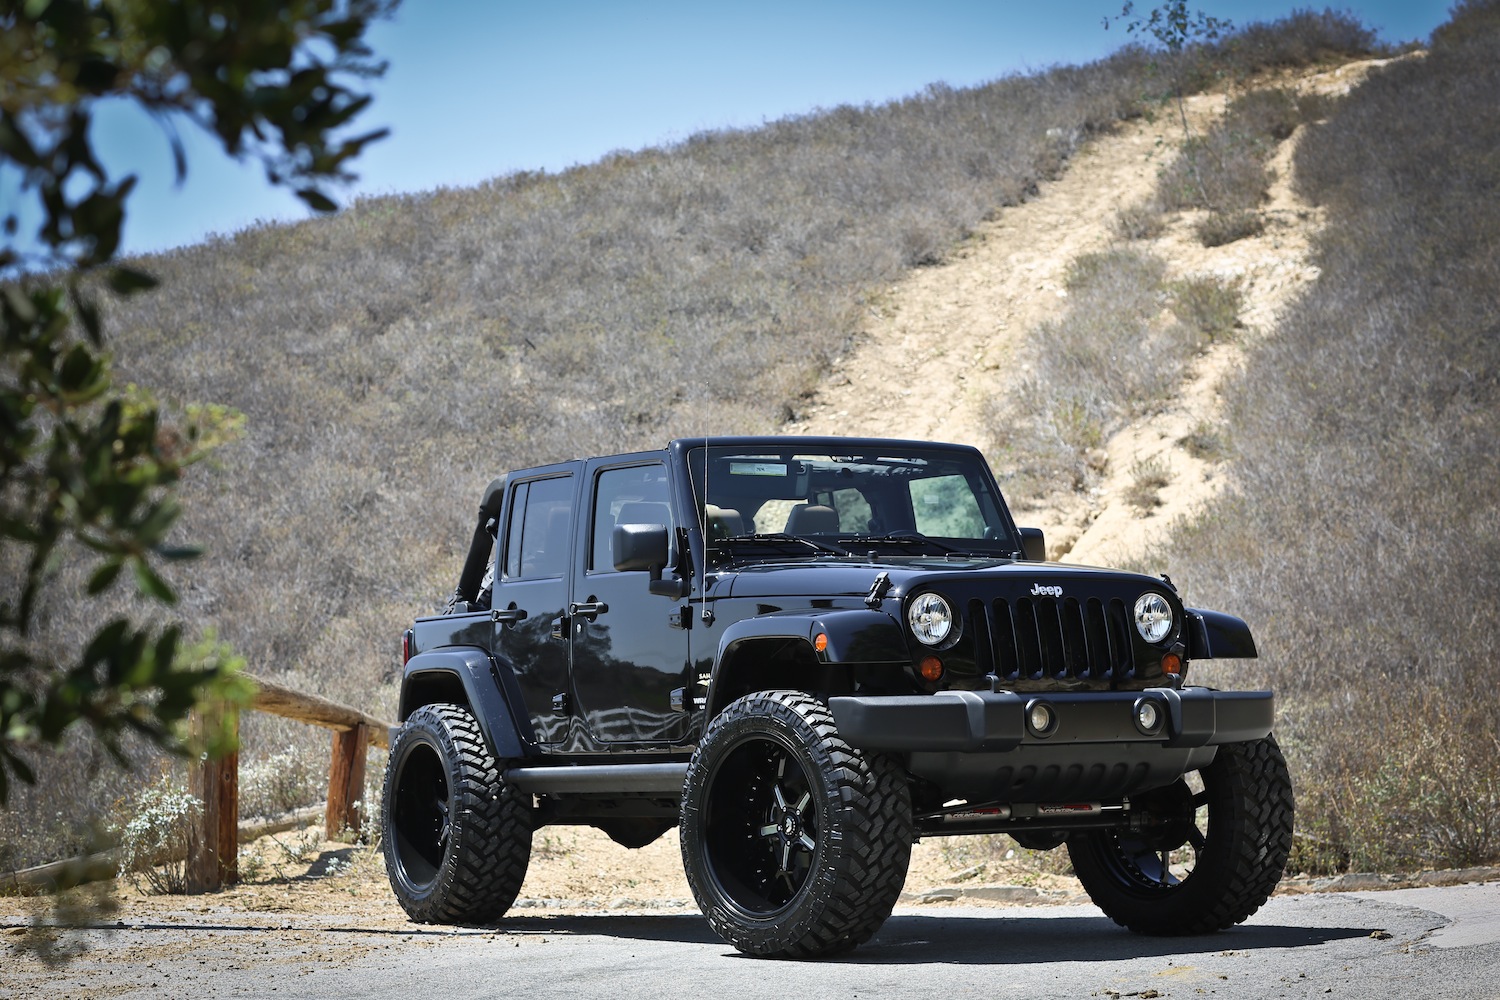 Free Download Check Out This Lifted Jeep Wrangler Unlimited W Forgiato Gtr Wheels 1500x1000 For Your Desktop Mobile Tablet Explore 33 Lifted Jeep Wrangler Wallpaper Lifted Jeep Wrangler Wallpaper